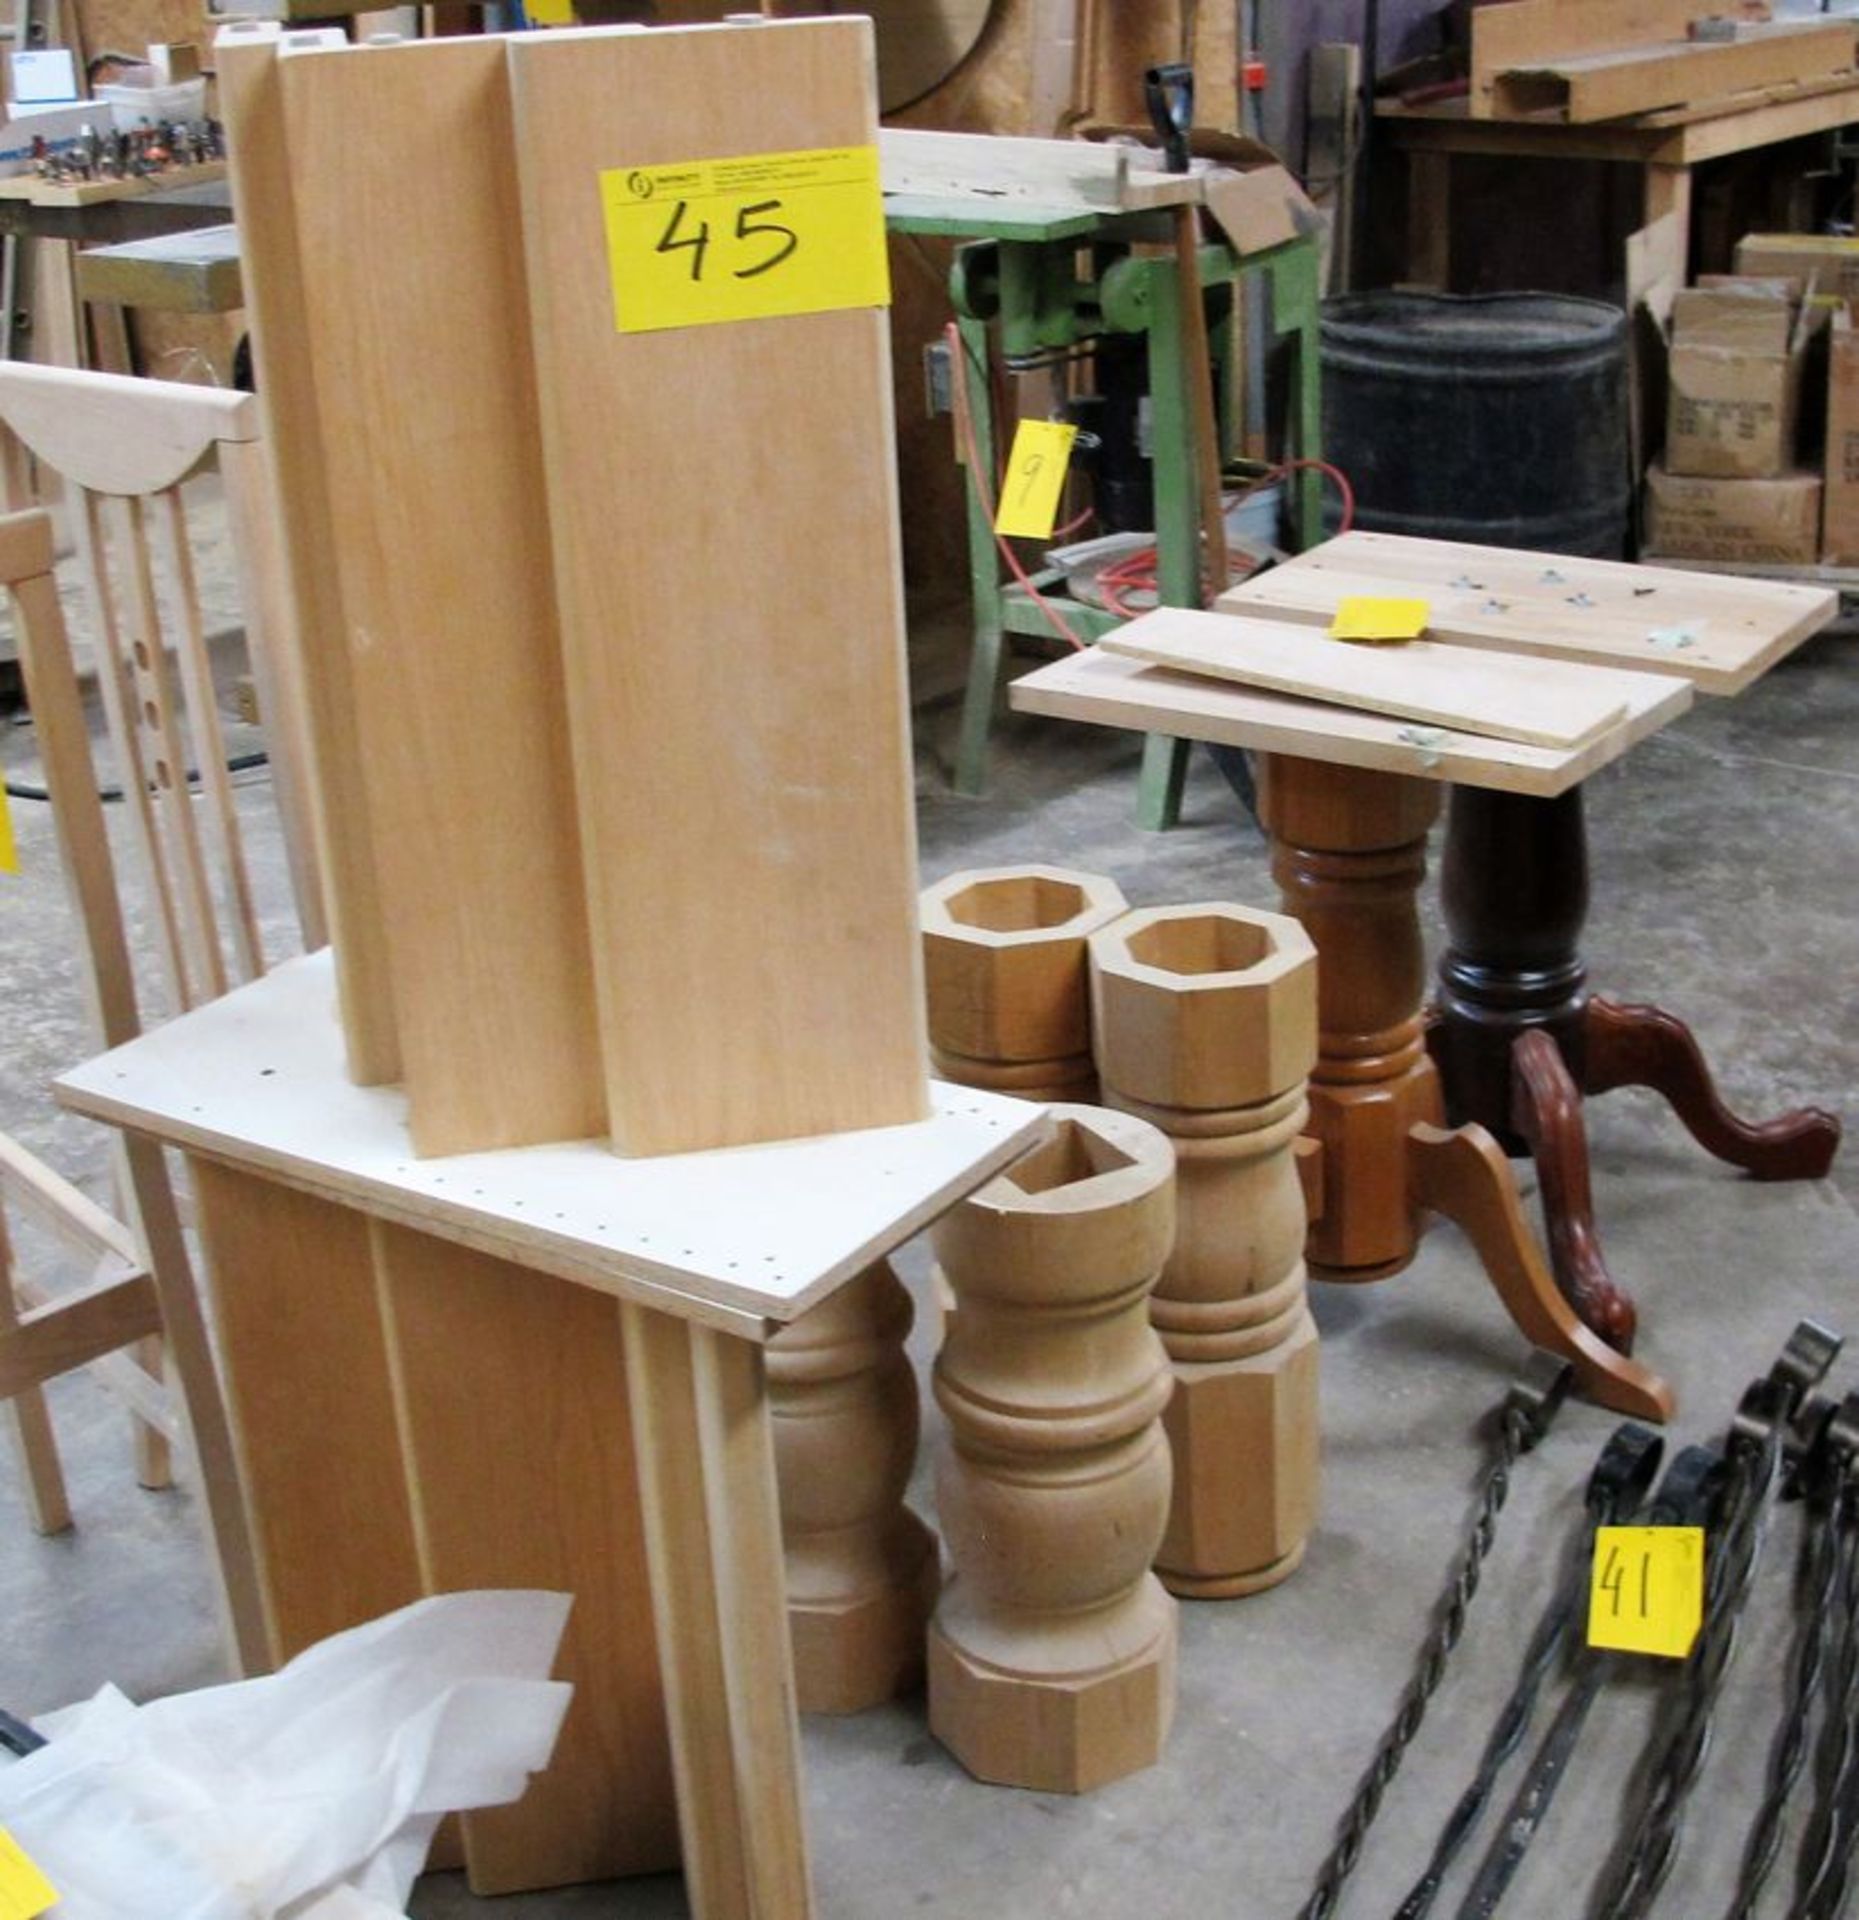 LOT OF ASST. DINING TABLE COMPONENTS, TABLE TOPS, LEGS, BASES, FOLDING TABLE, ETC. (NO CARTS) - Image 4 of 4